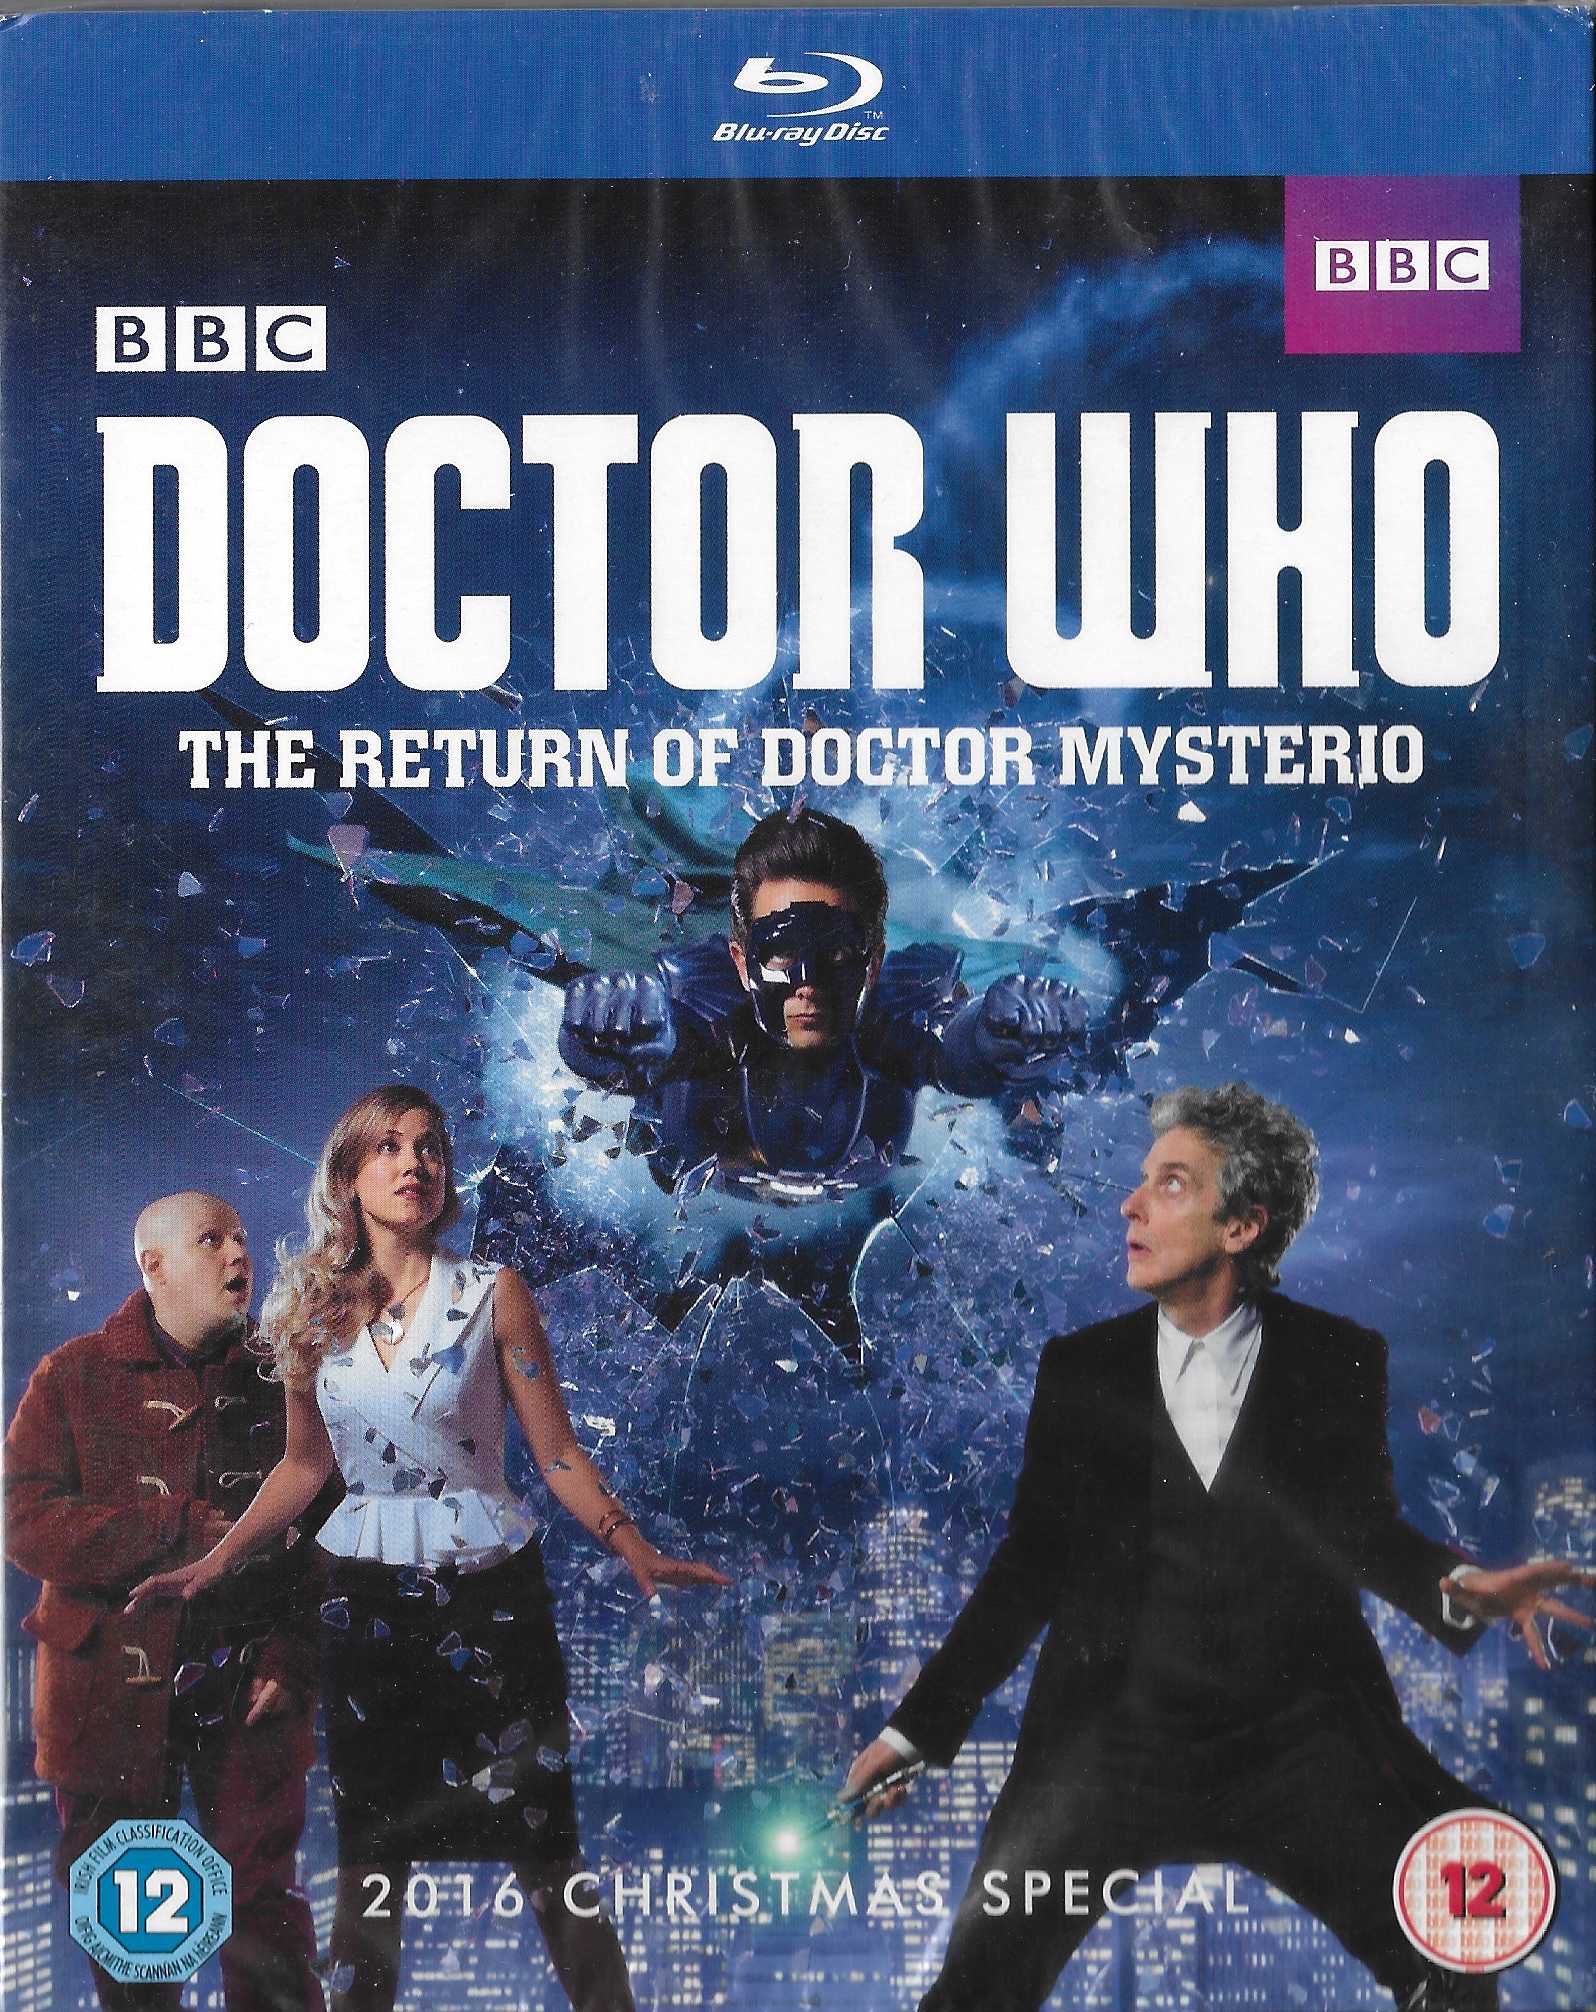 Picture of BBCBD 0391 Doctor Who - The return of Doctor Mysterio by artist Steven Moffat from the BBC blu-rays - Records and Tapes library